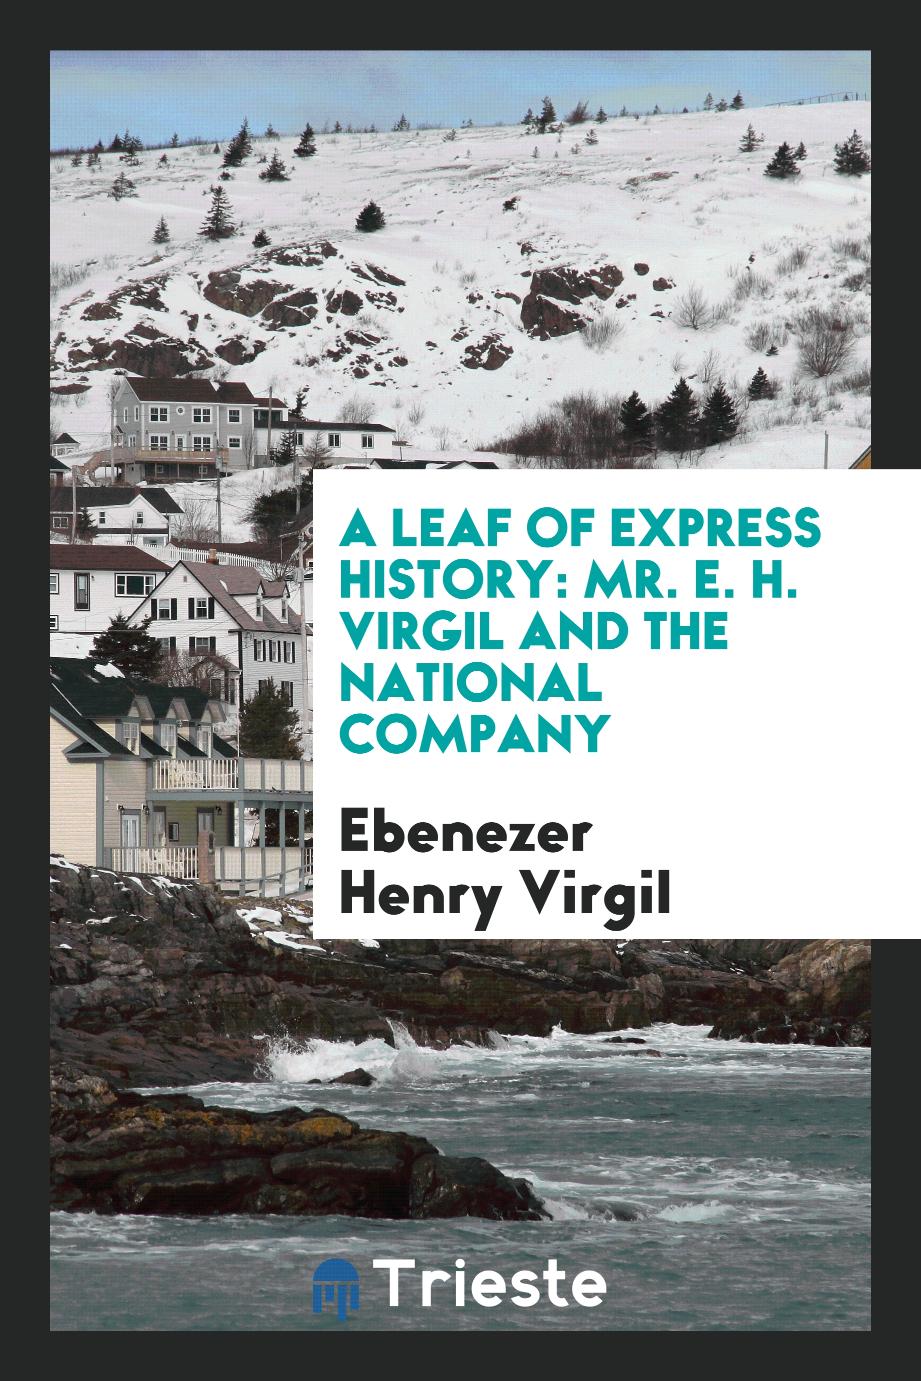 A Leaf of Express History: Mr. E. H. Virgil and the National Company